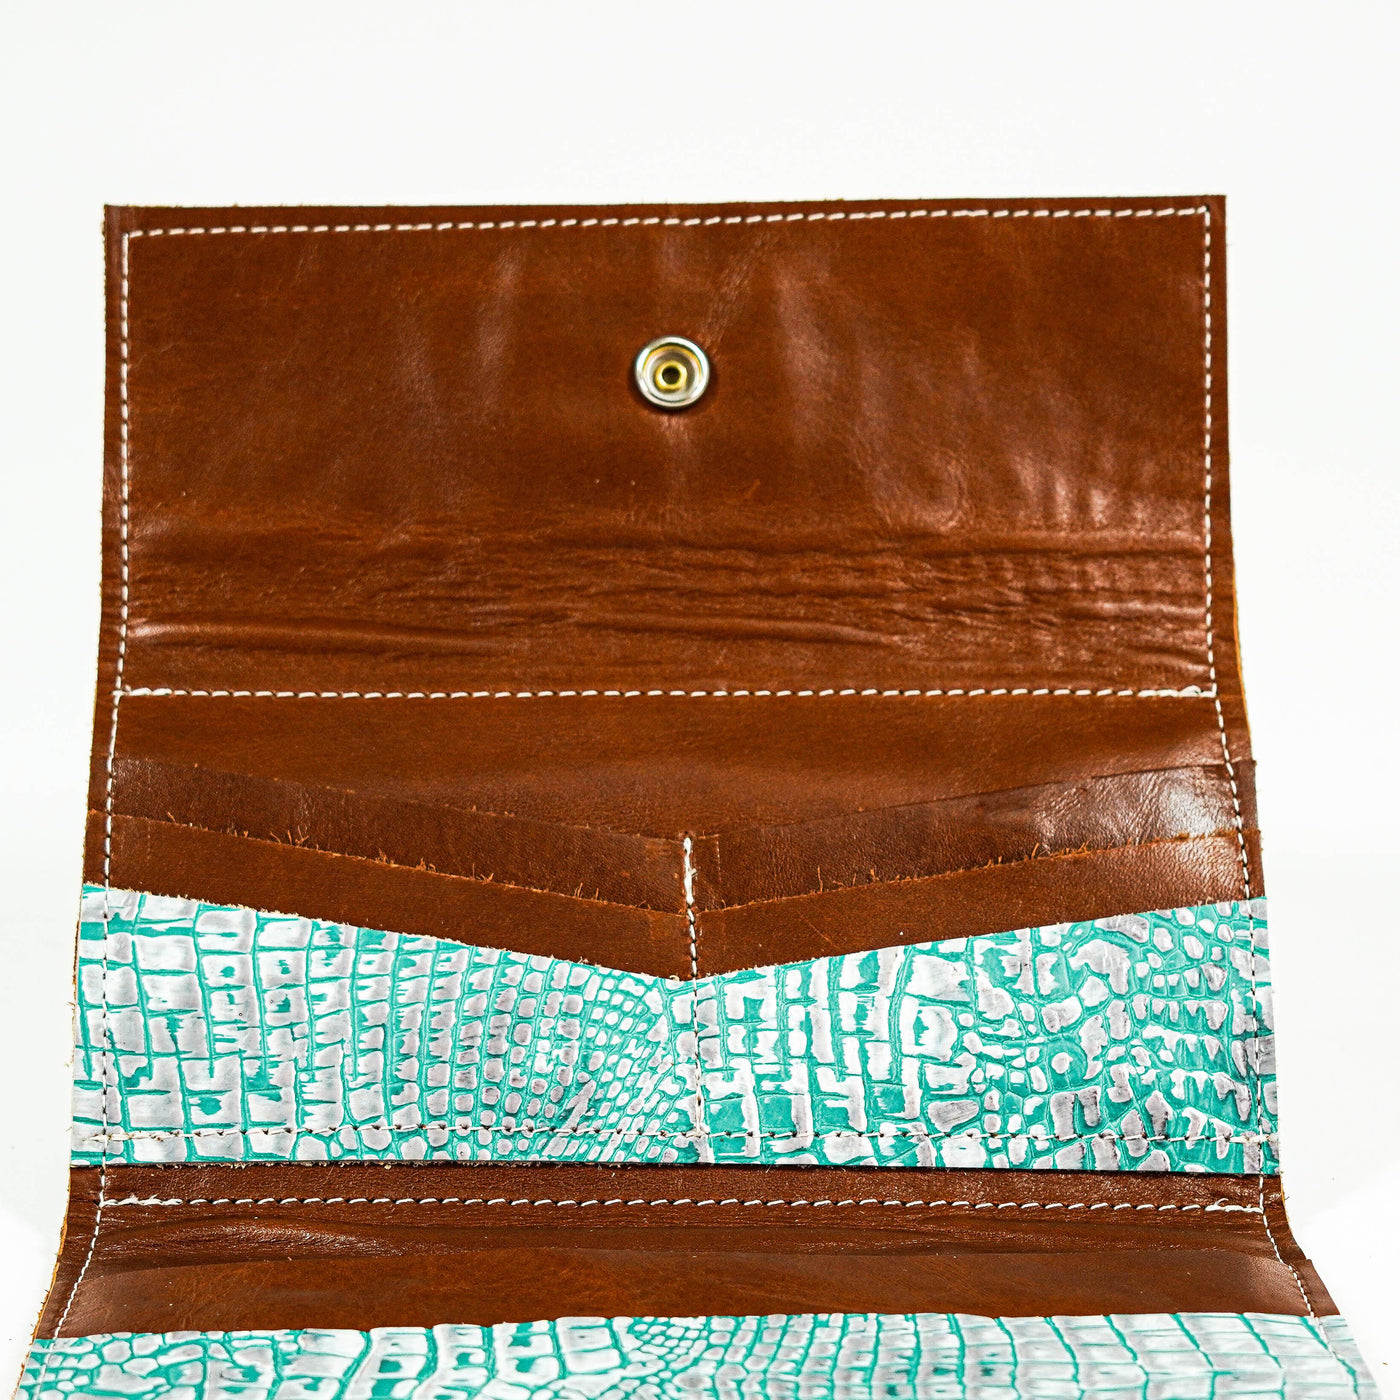 Embossed Leather Kacey Wallets - Caramel Interior-Kacey Wallet-Western-Cowhide-Bags-Handmade-Products-Gifts-Dancing Cactus Designs